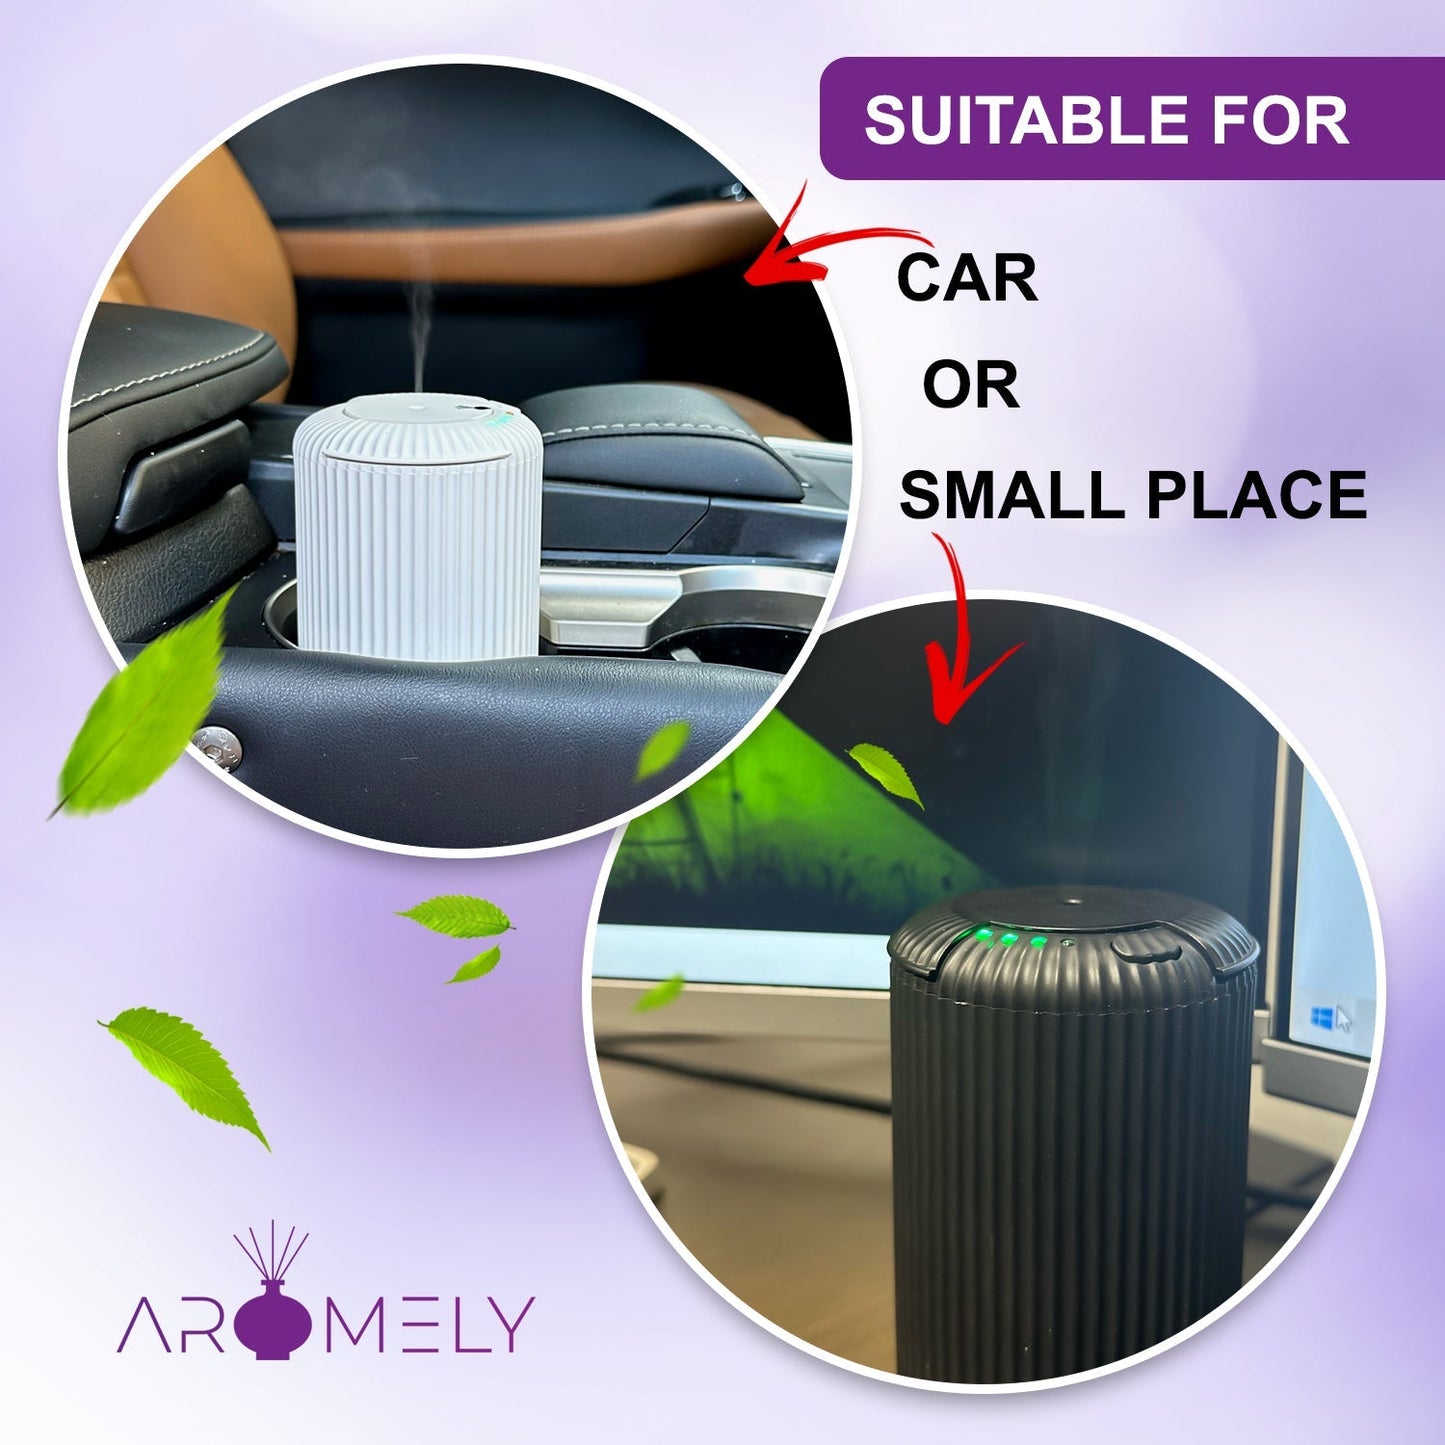 ARO-CAR by Aromely - Bringing your favorite fragrances anywhere